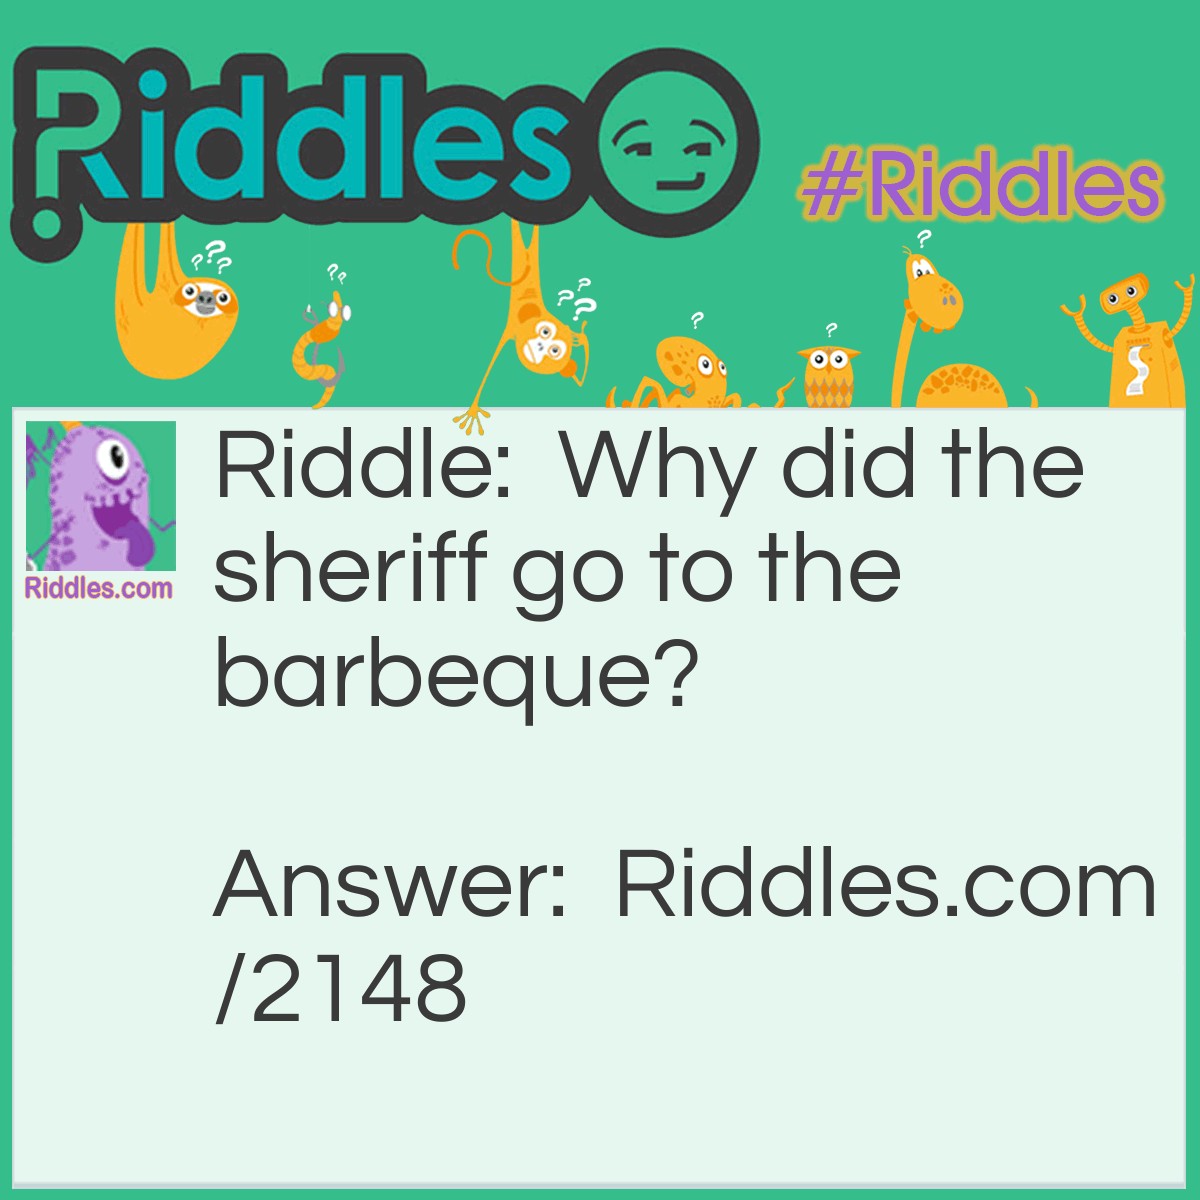 Riddle: Why did the sheriff go to the barbeque? Answer: He heard it was a place to have a steak out.